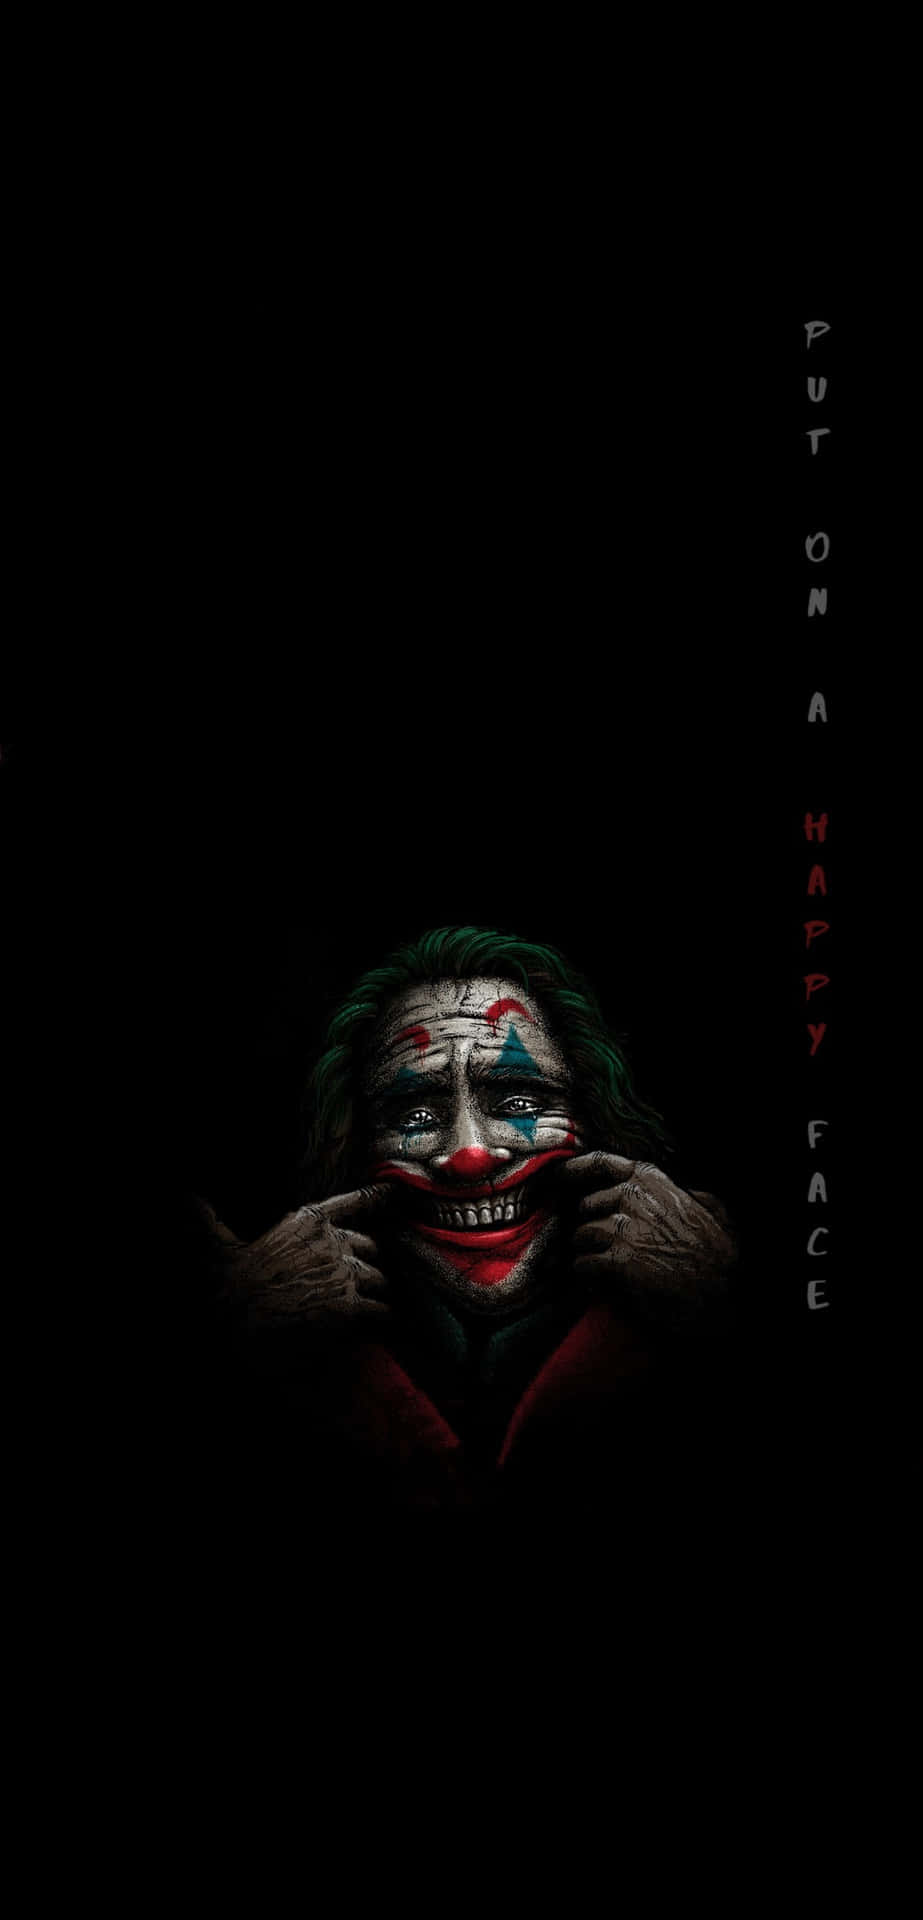 The Dark Knight's Joker Smiling with Famous Quotes Wallpaper